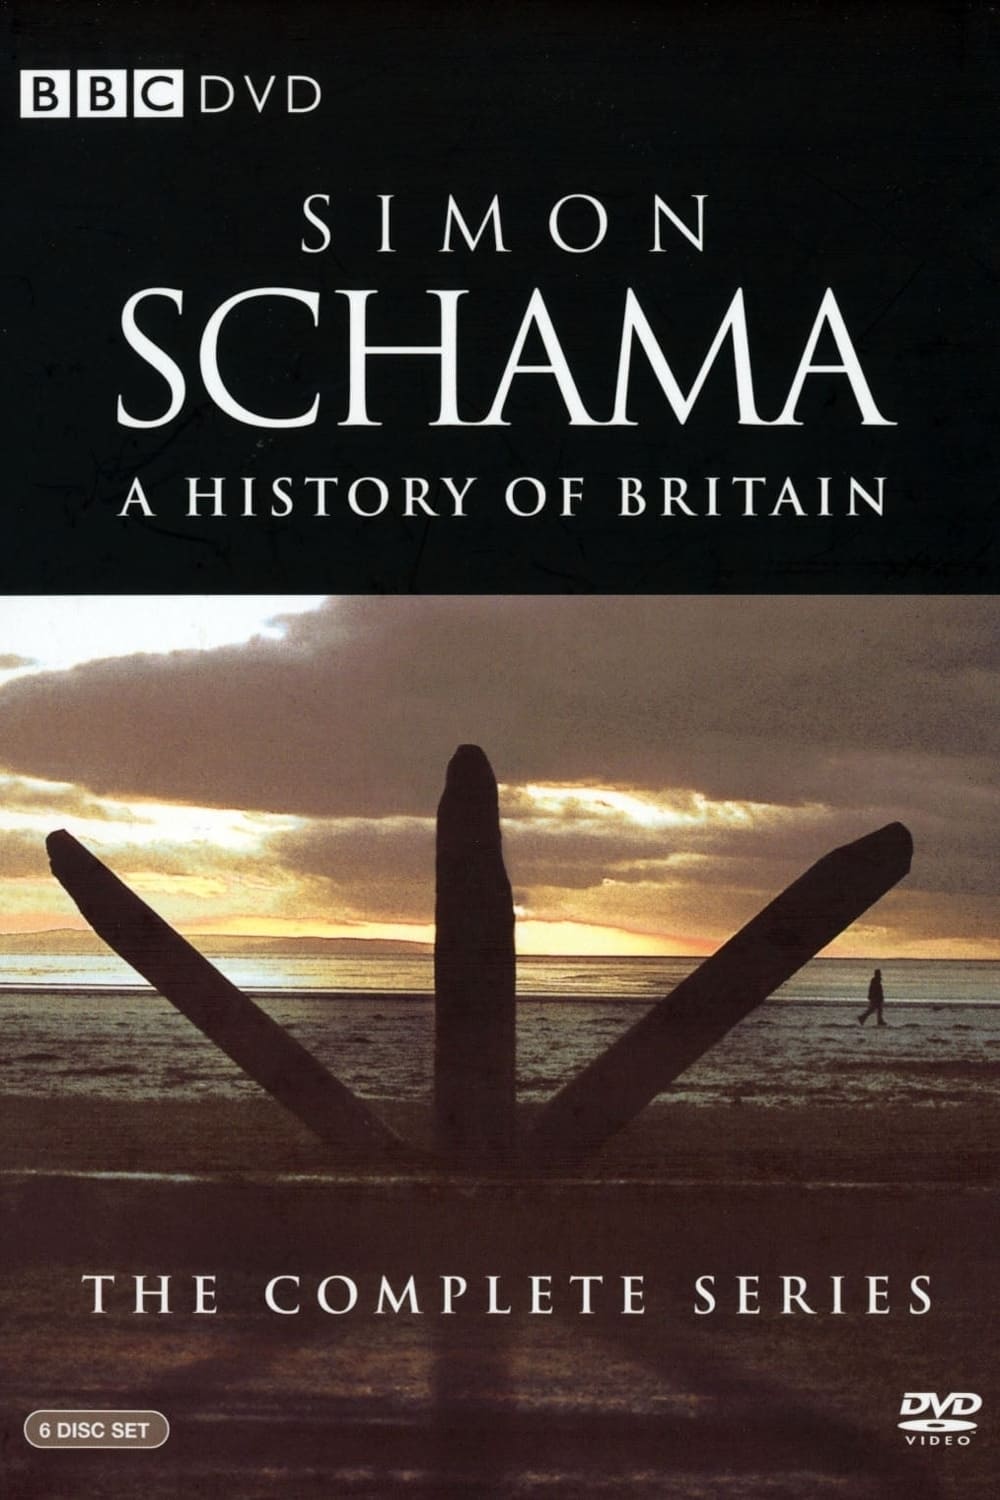 A History of Britain (2000)